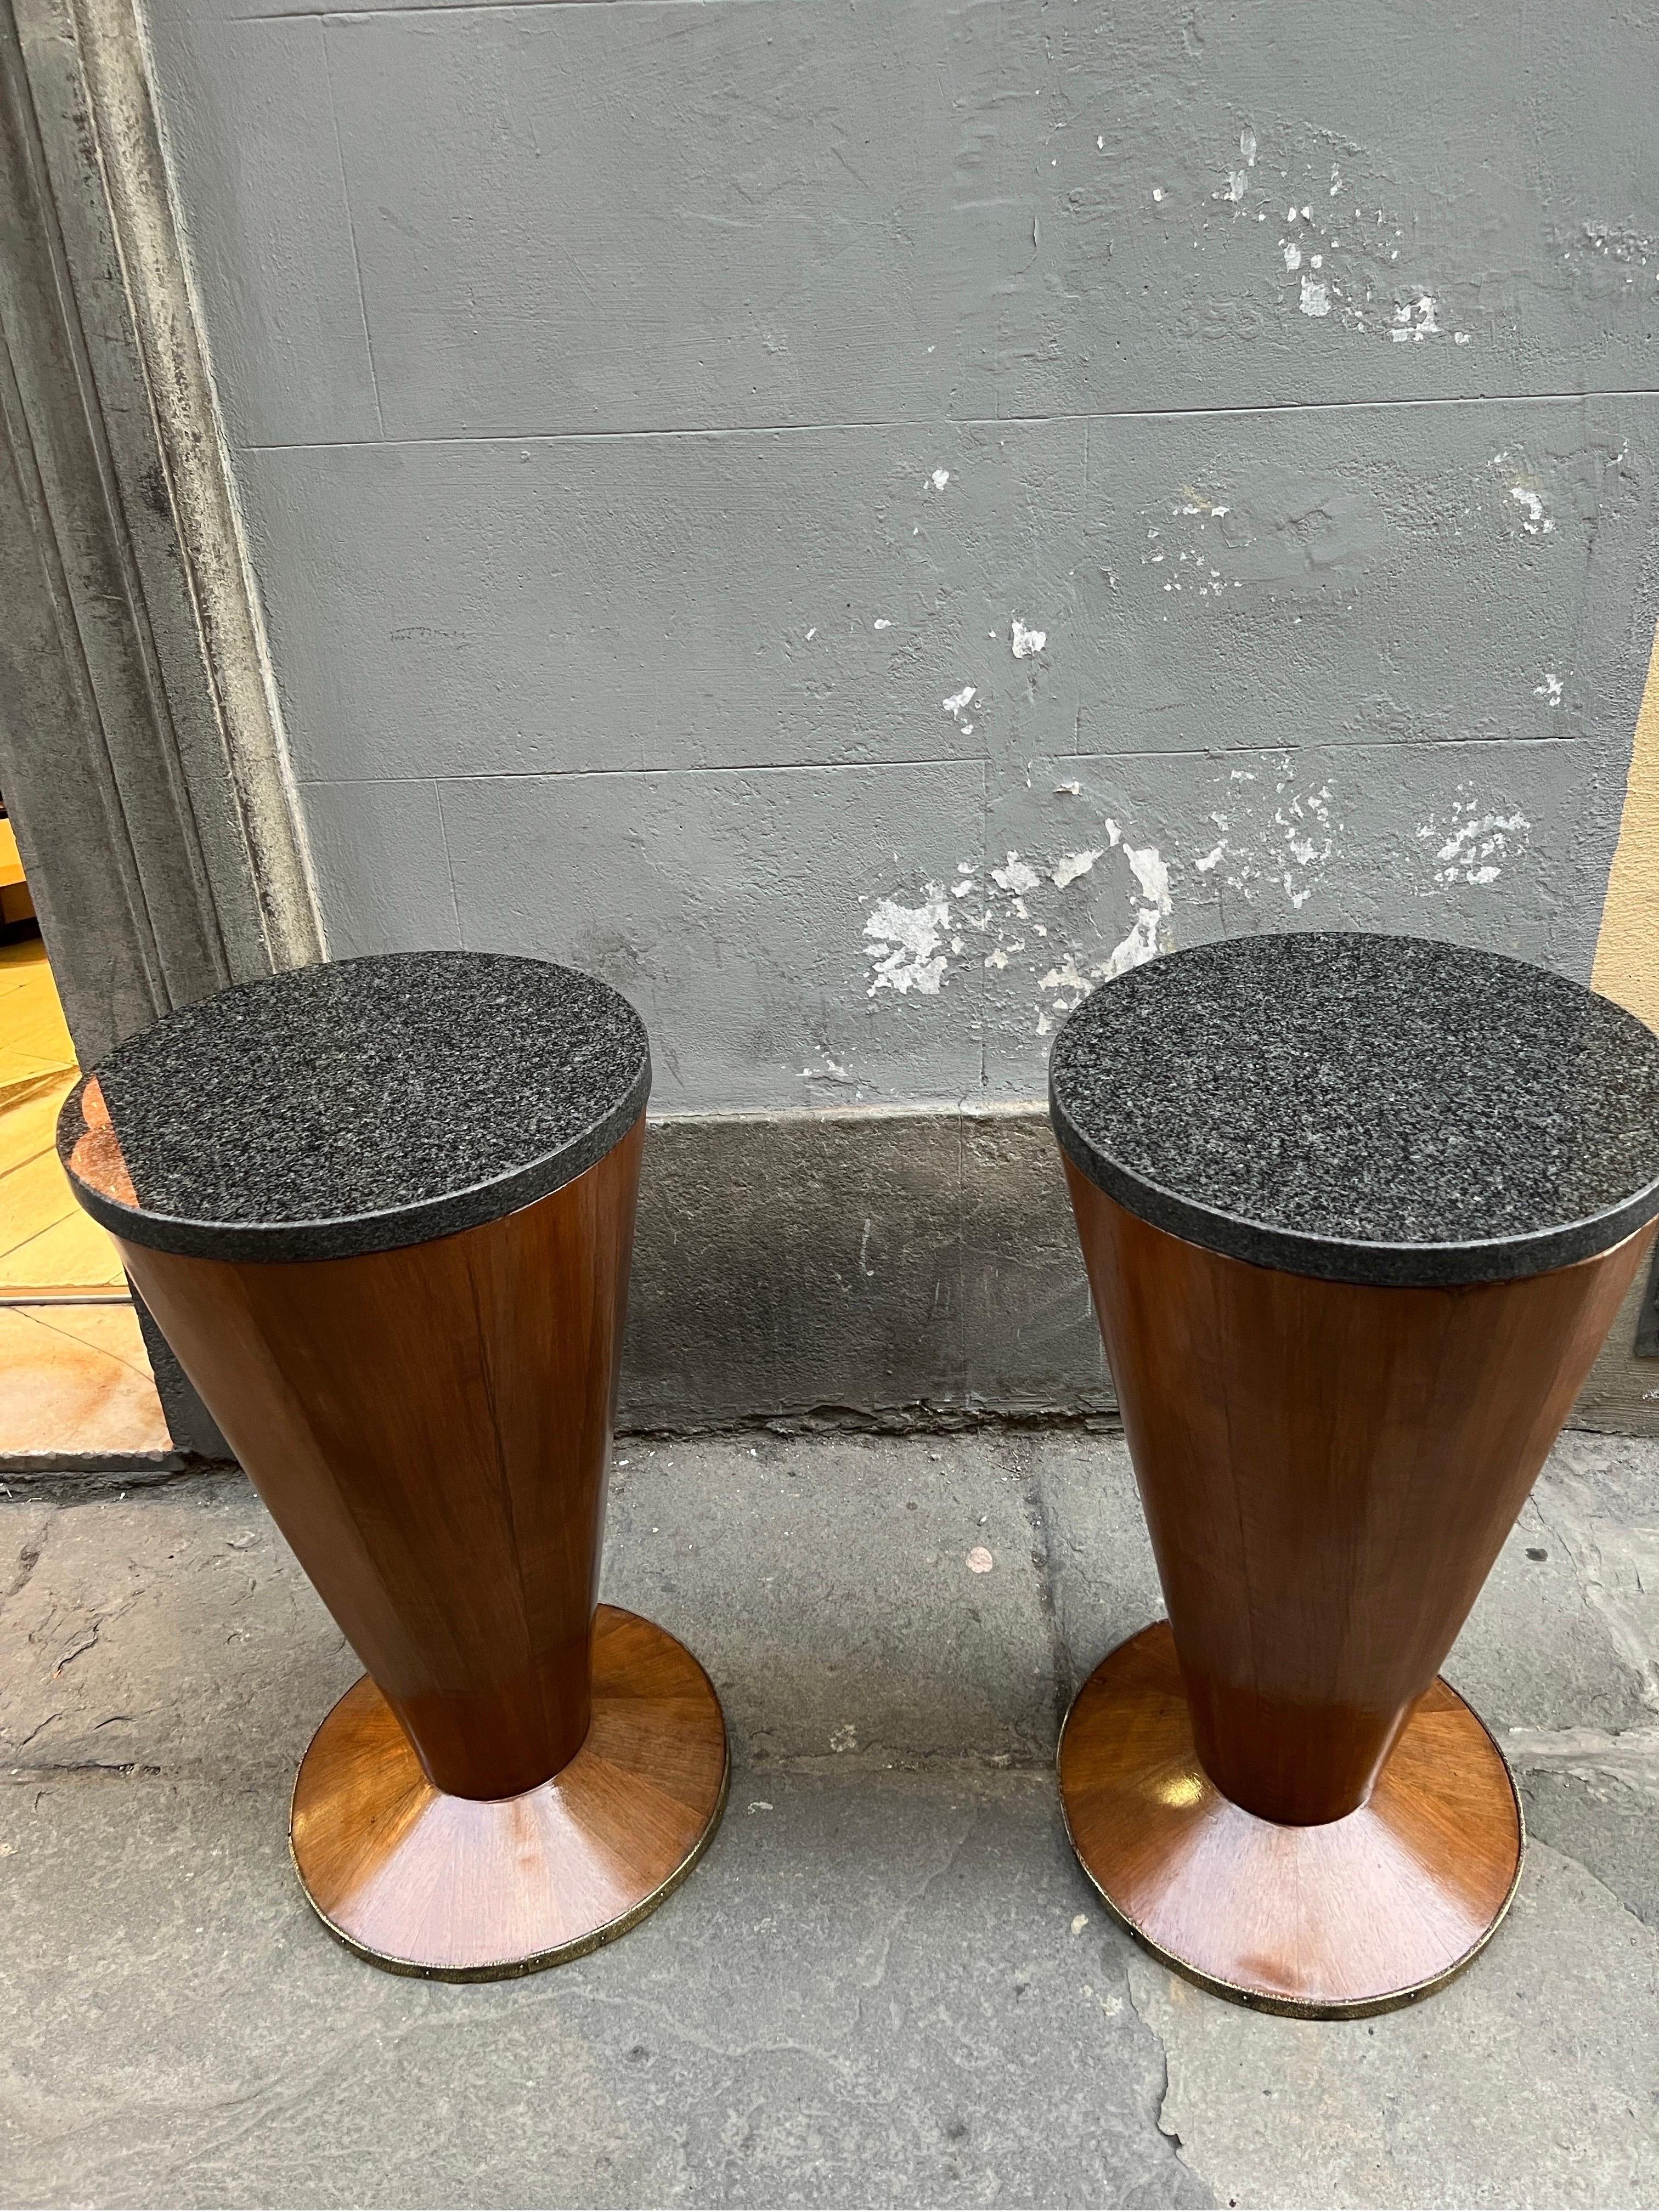 Pair of Art Deco Conical Cherry Wood Side Tables with Marble Top 1940s For Sale 2